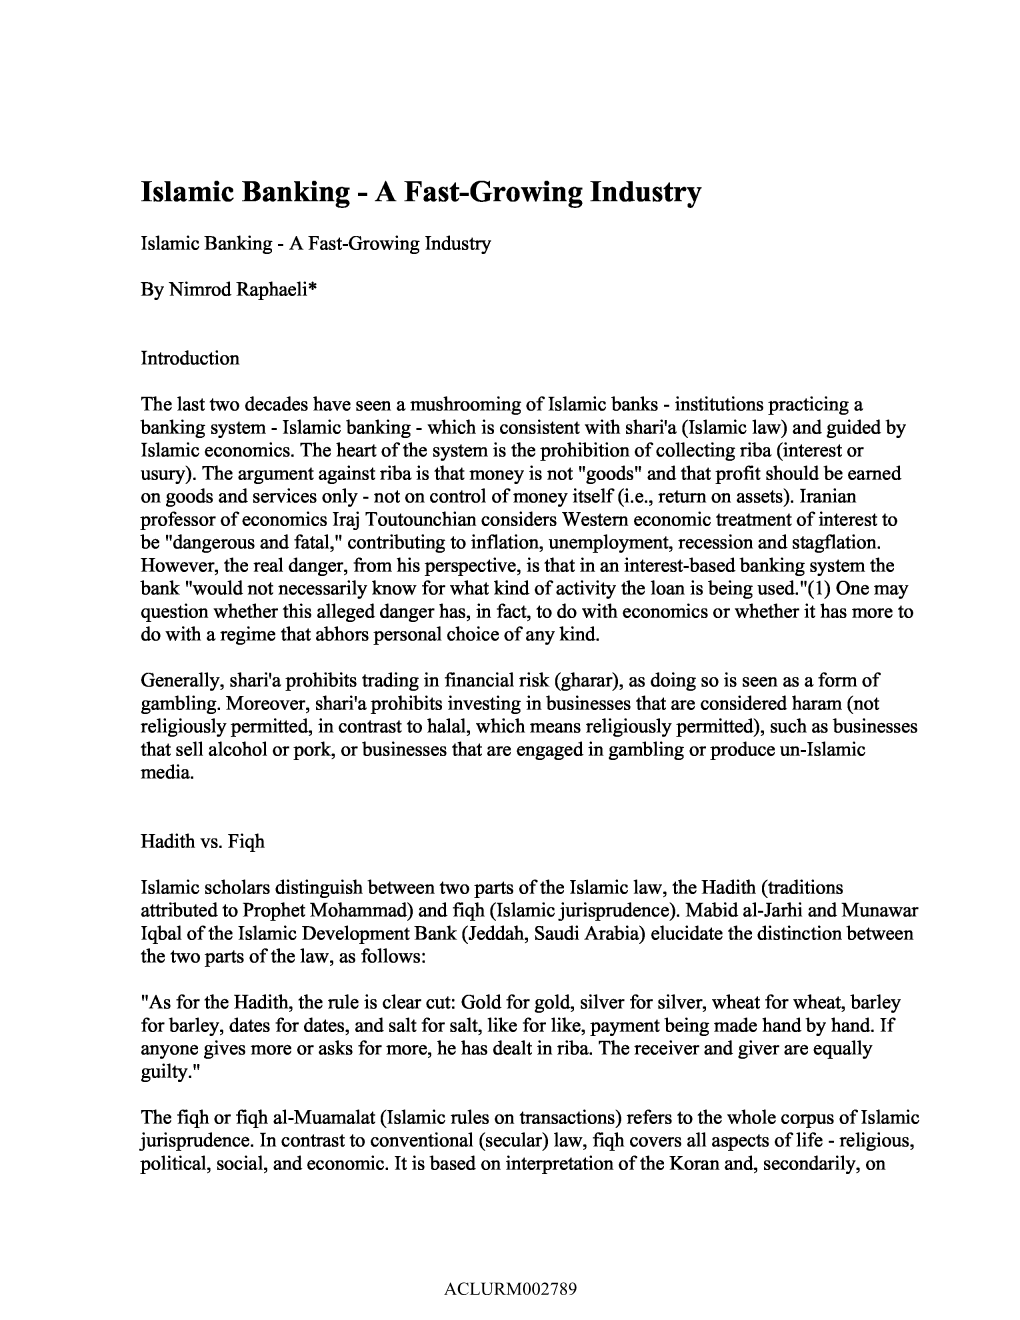 Islamic Banking - a Fast-Growing Industry